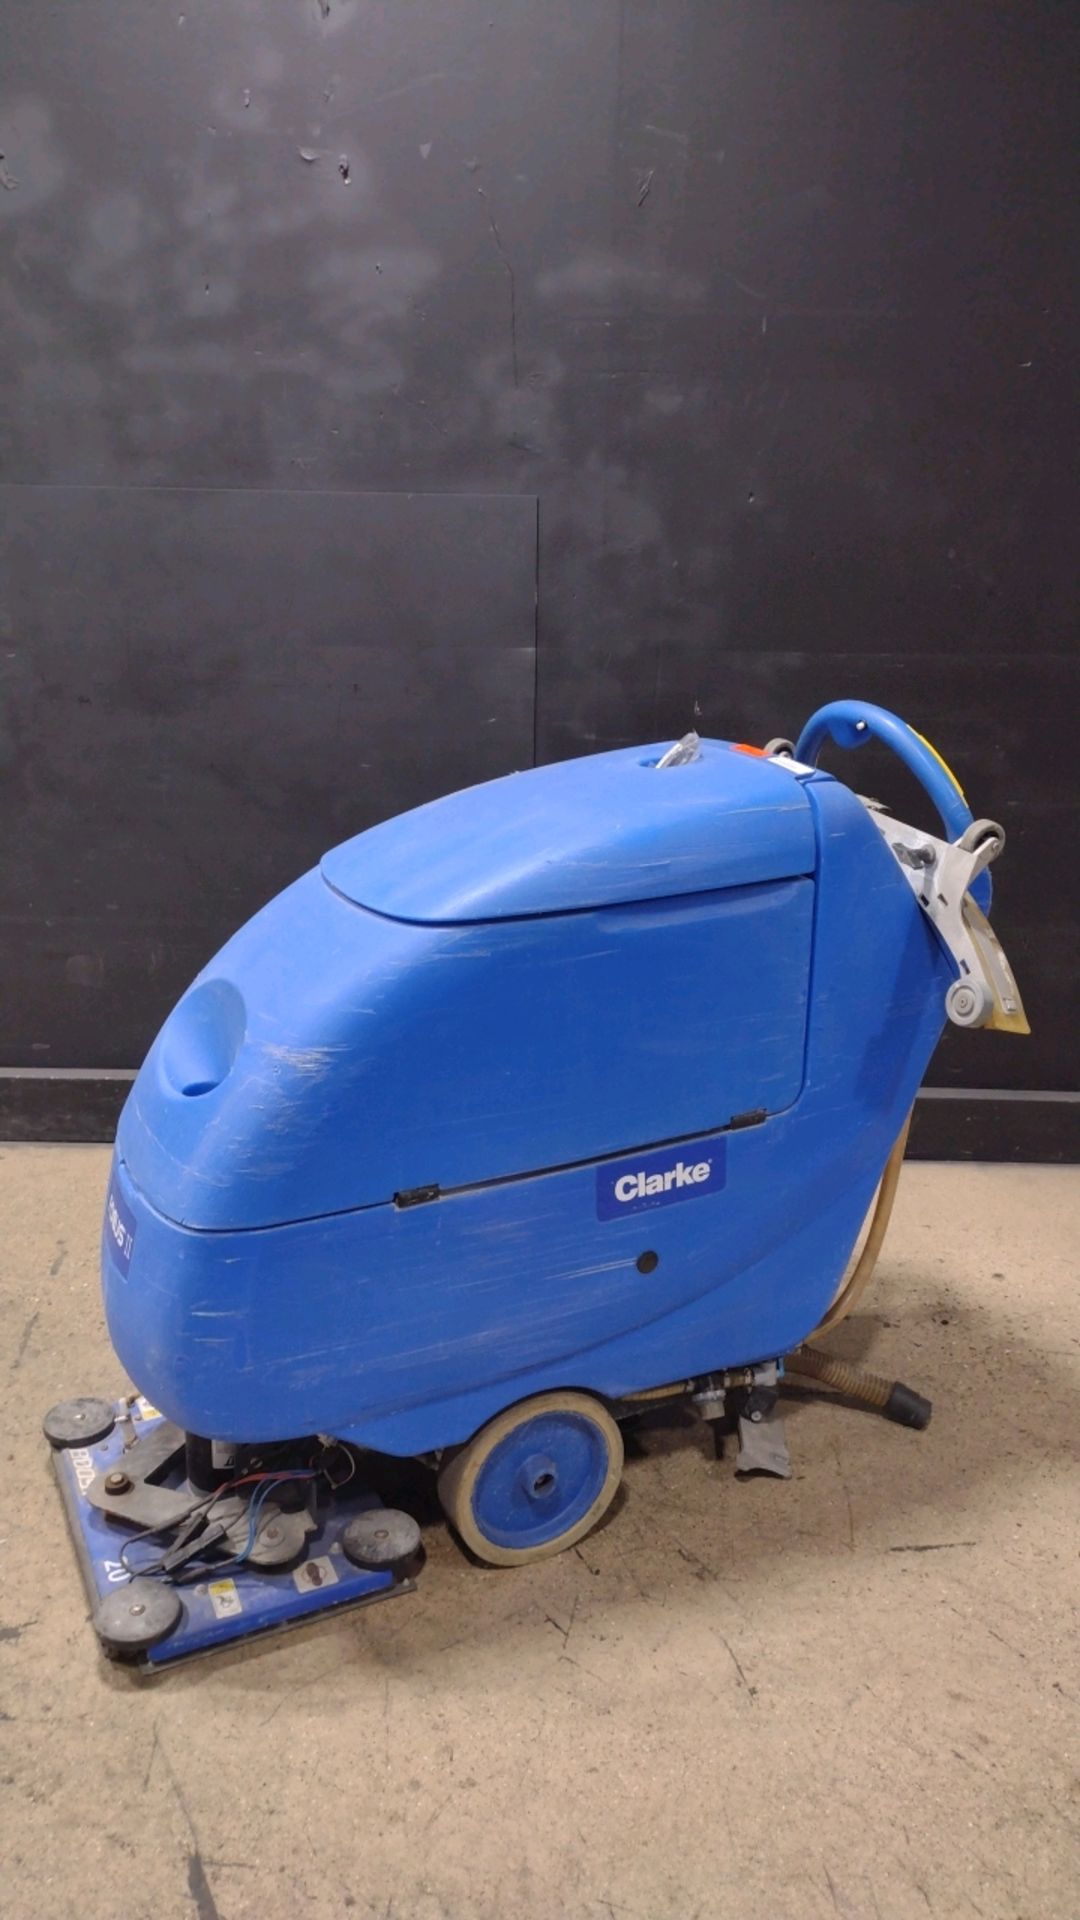 CLARKE FOCUS II FLOOR MACHINE (LOCATED AT 3325 MOUNT PROSPECT ROAD, FRANKLIN PARK, IL, 60131) - Image 2 of 3